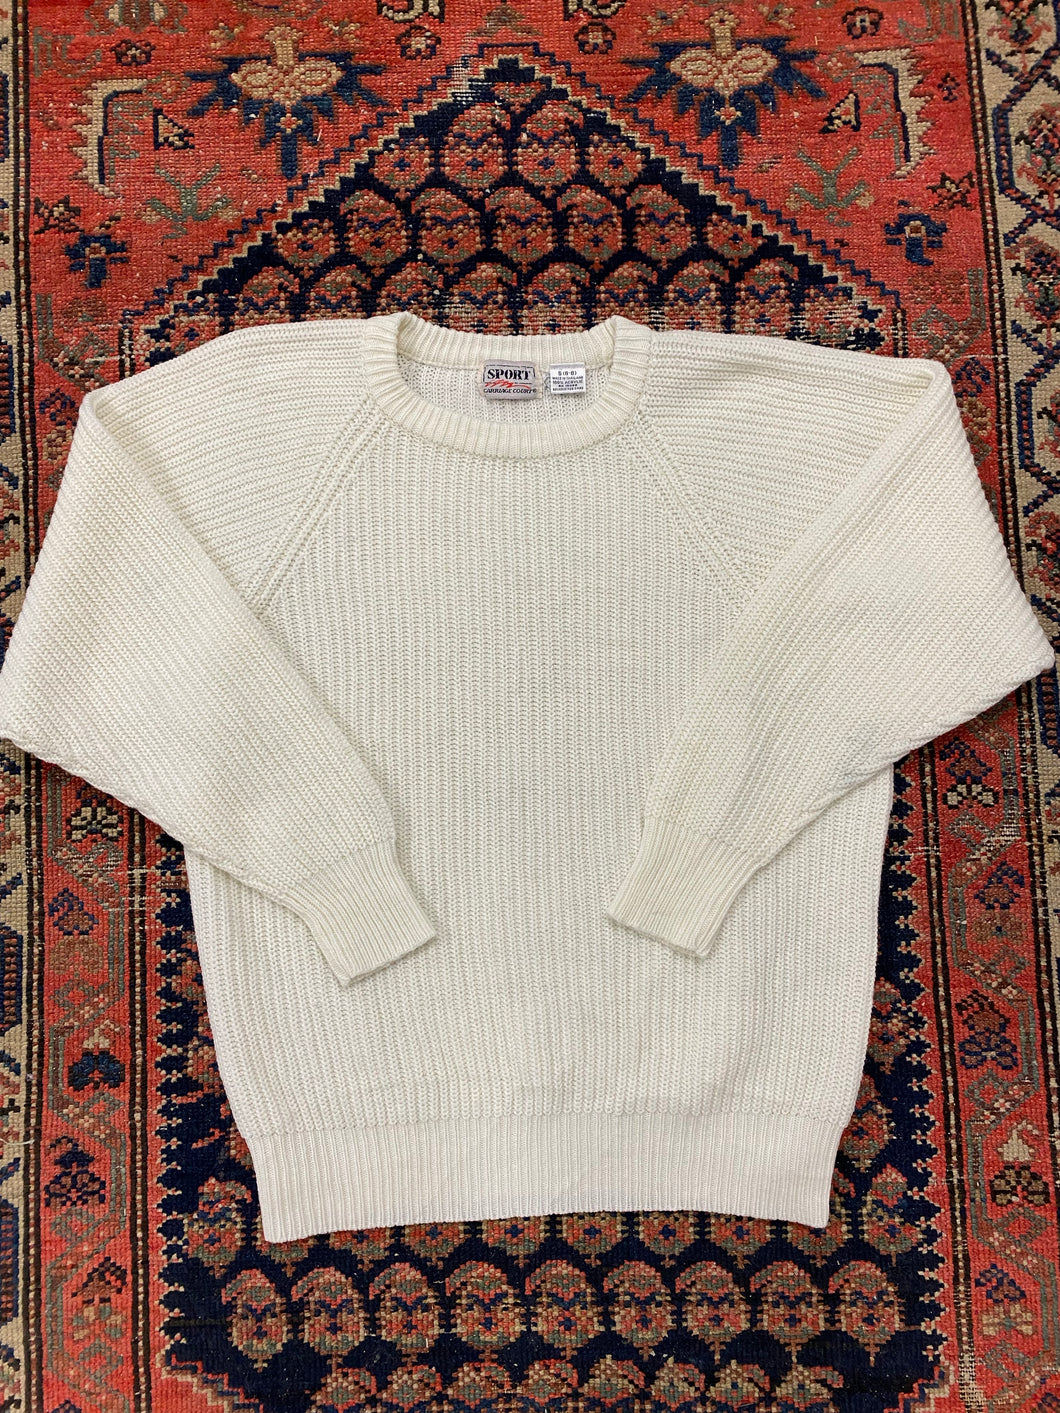 90s White Knit Sweater - S